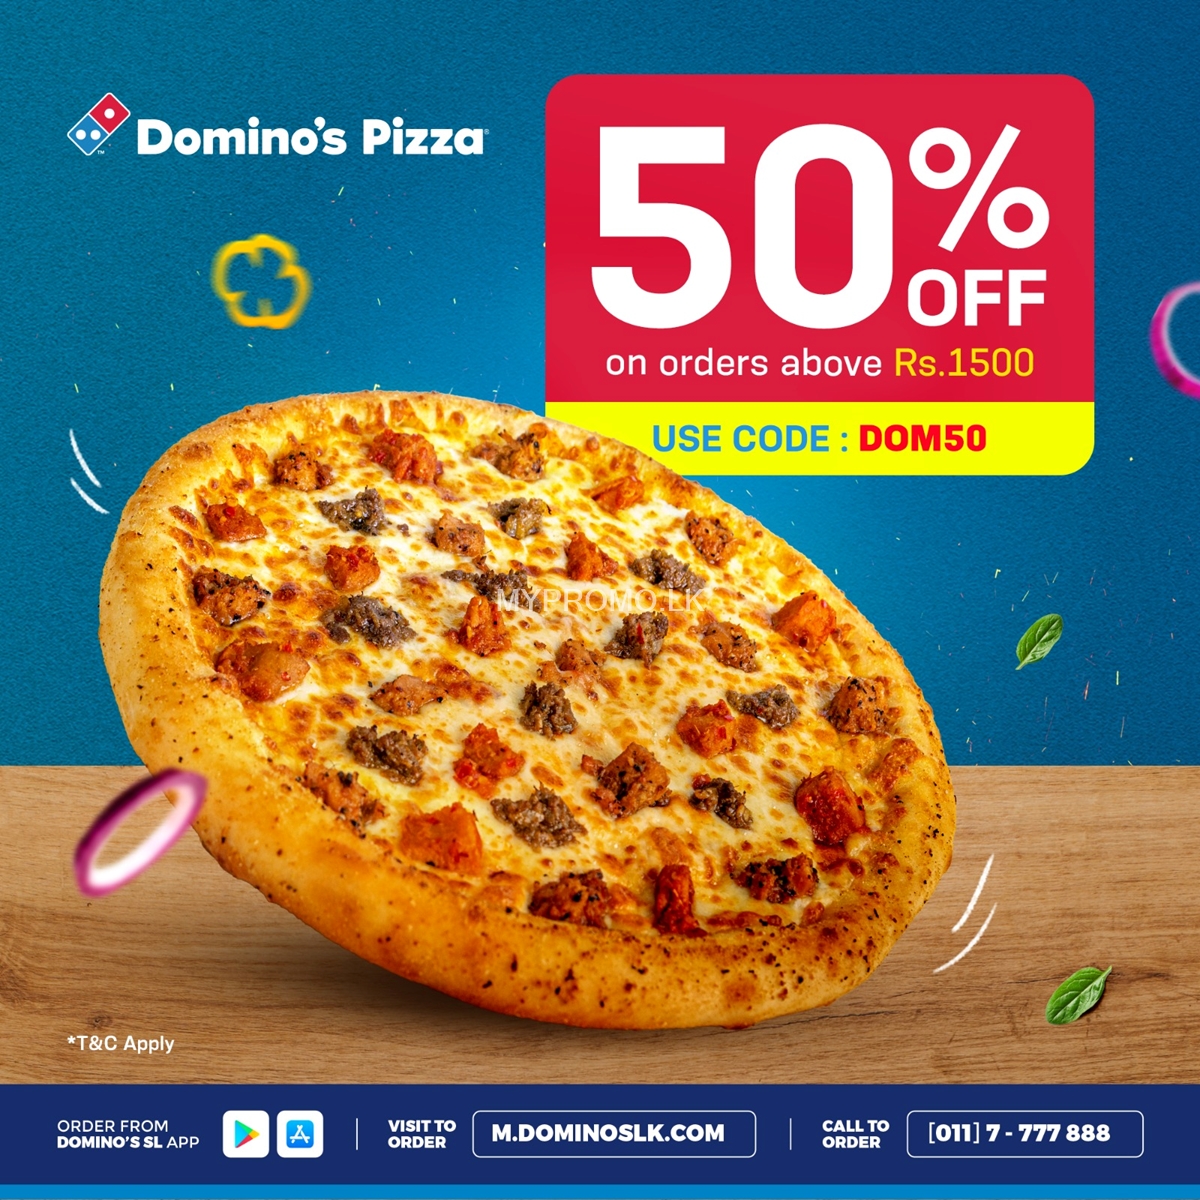 Enjoy 50% off up to Rs 750 for any order above Rs. 1500 at Domino's Pizza 